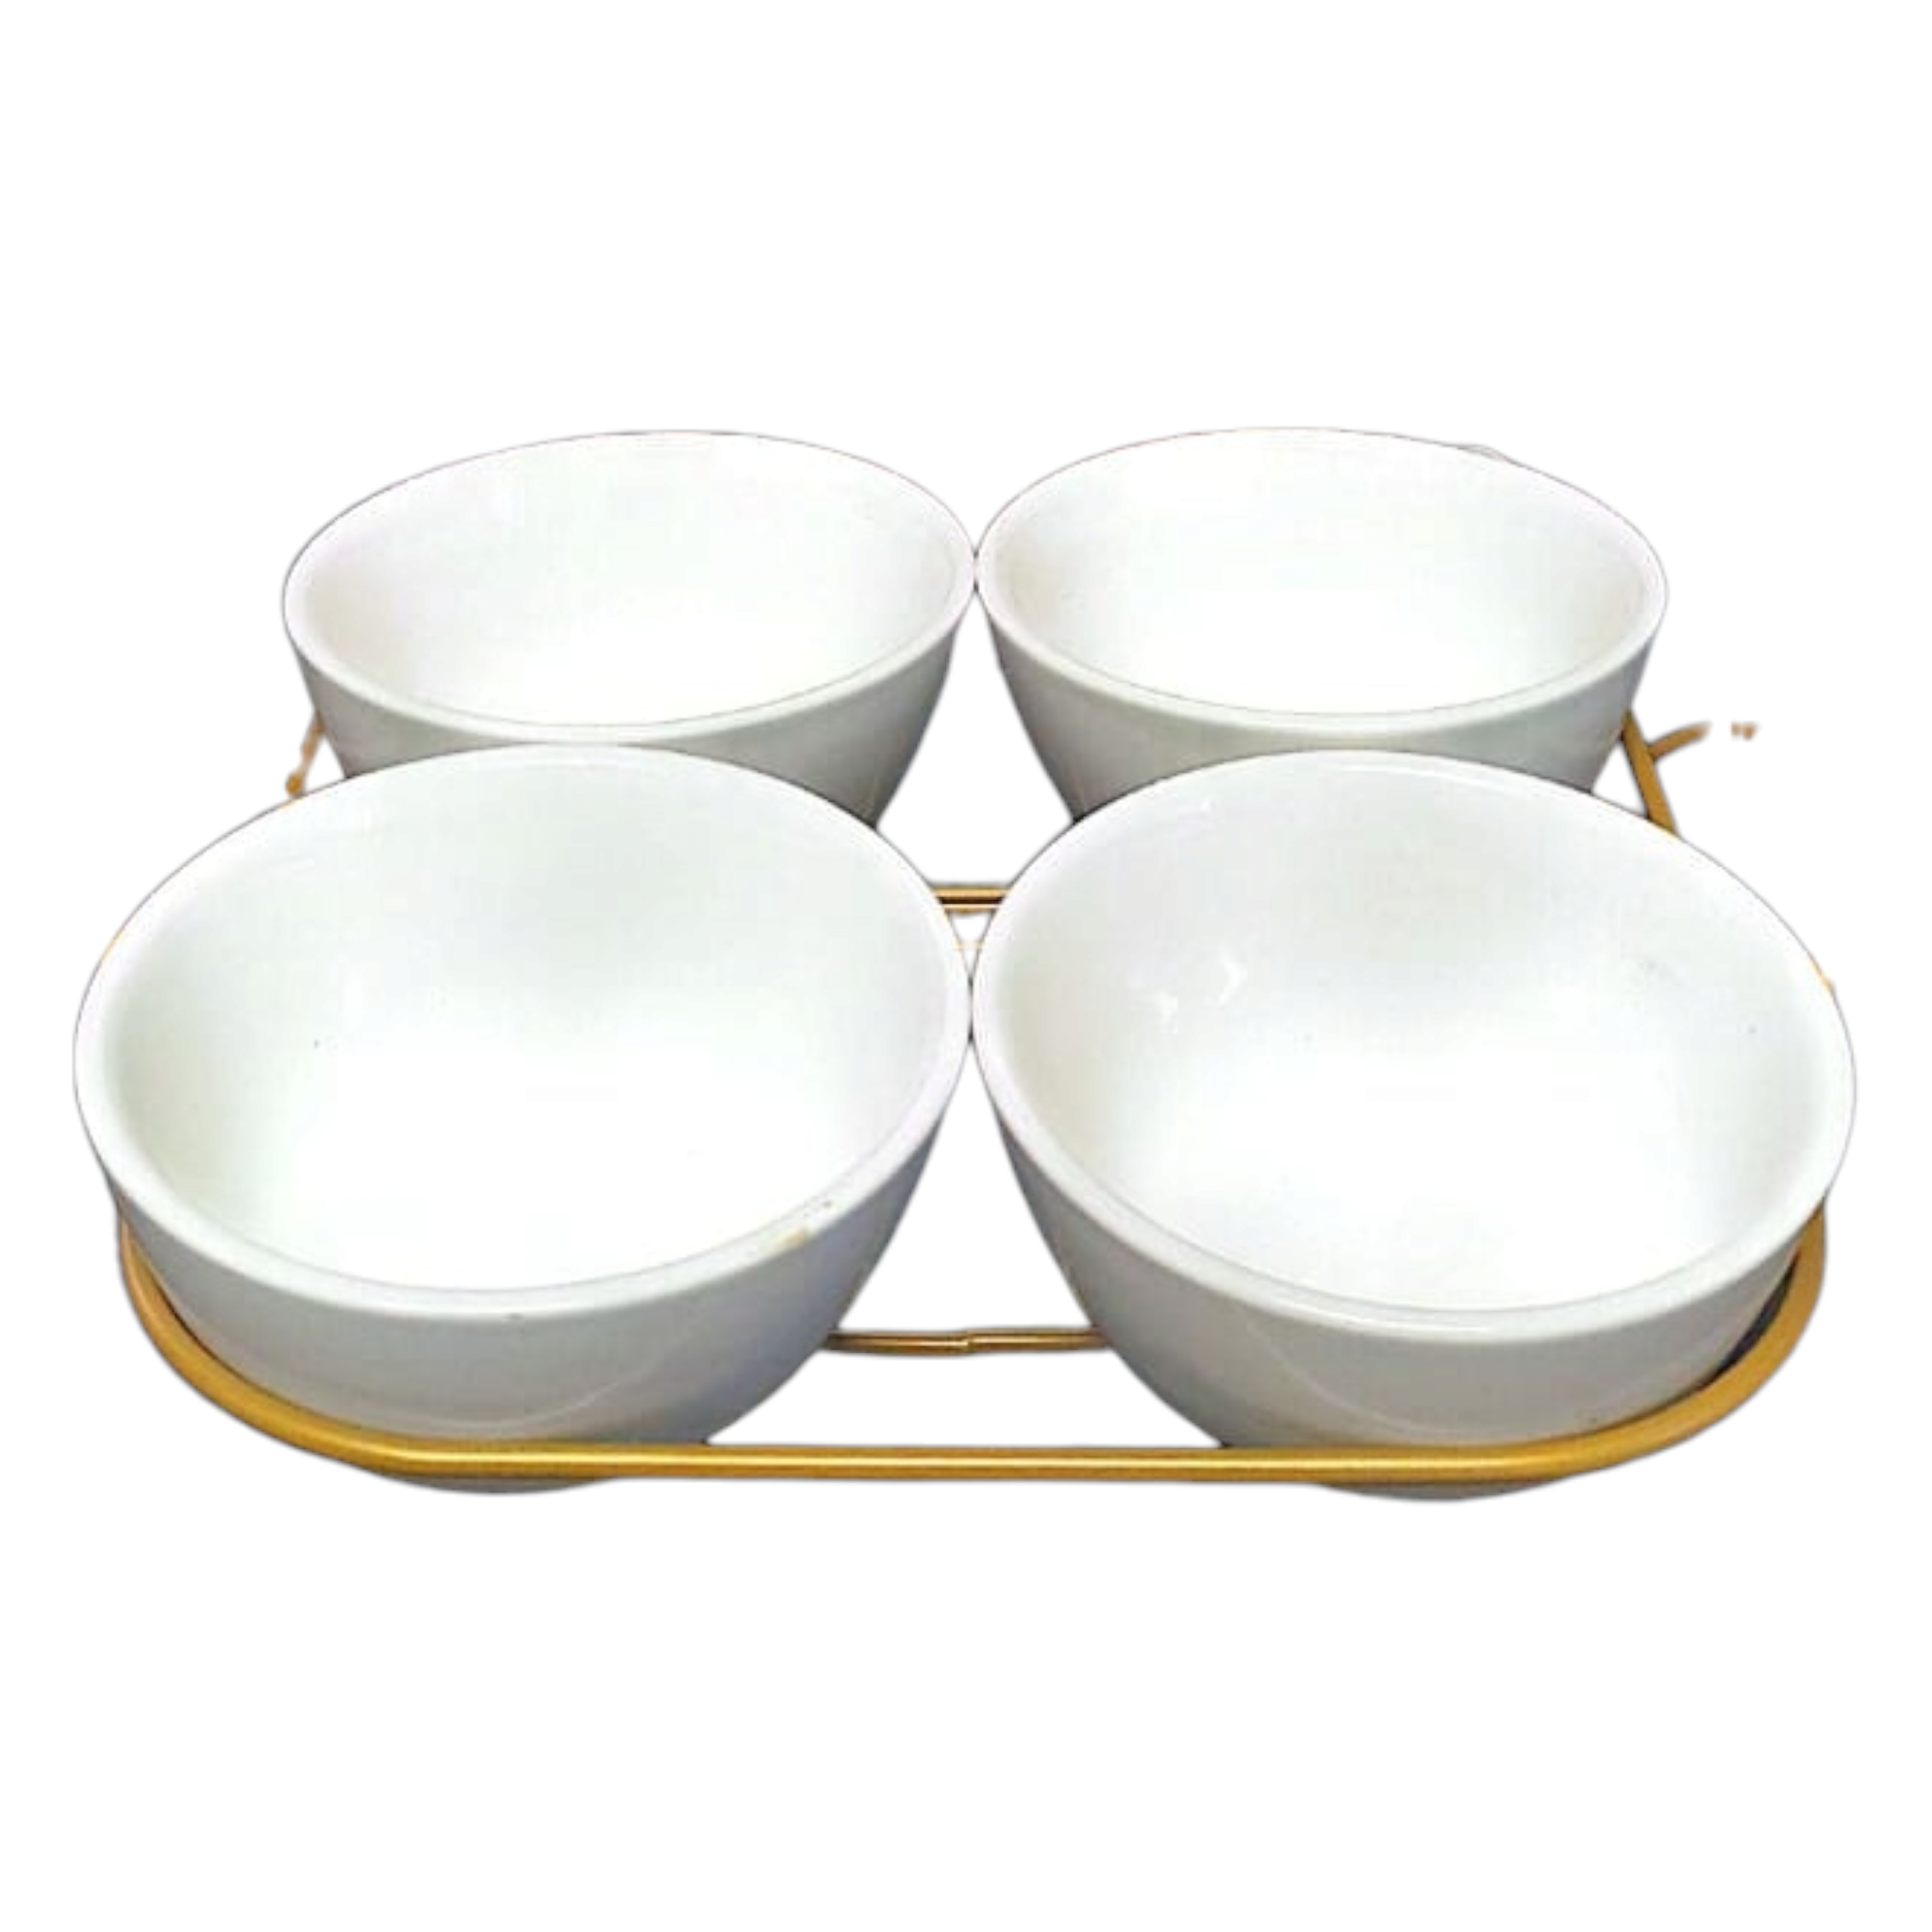 Ceramic White Round Bowl 4pc with Stand 3.5Inch INMIX-11699